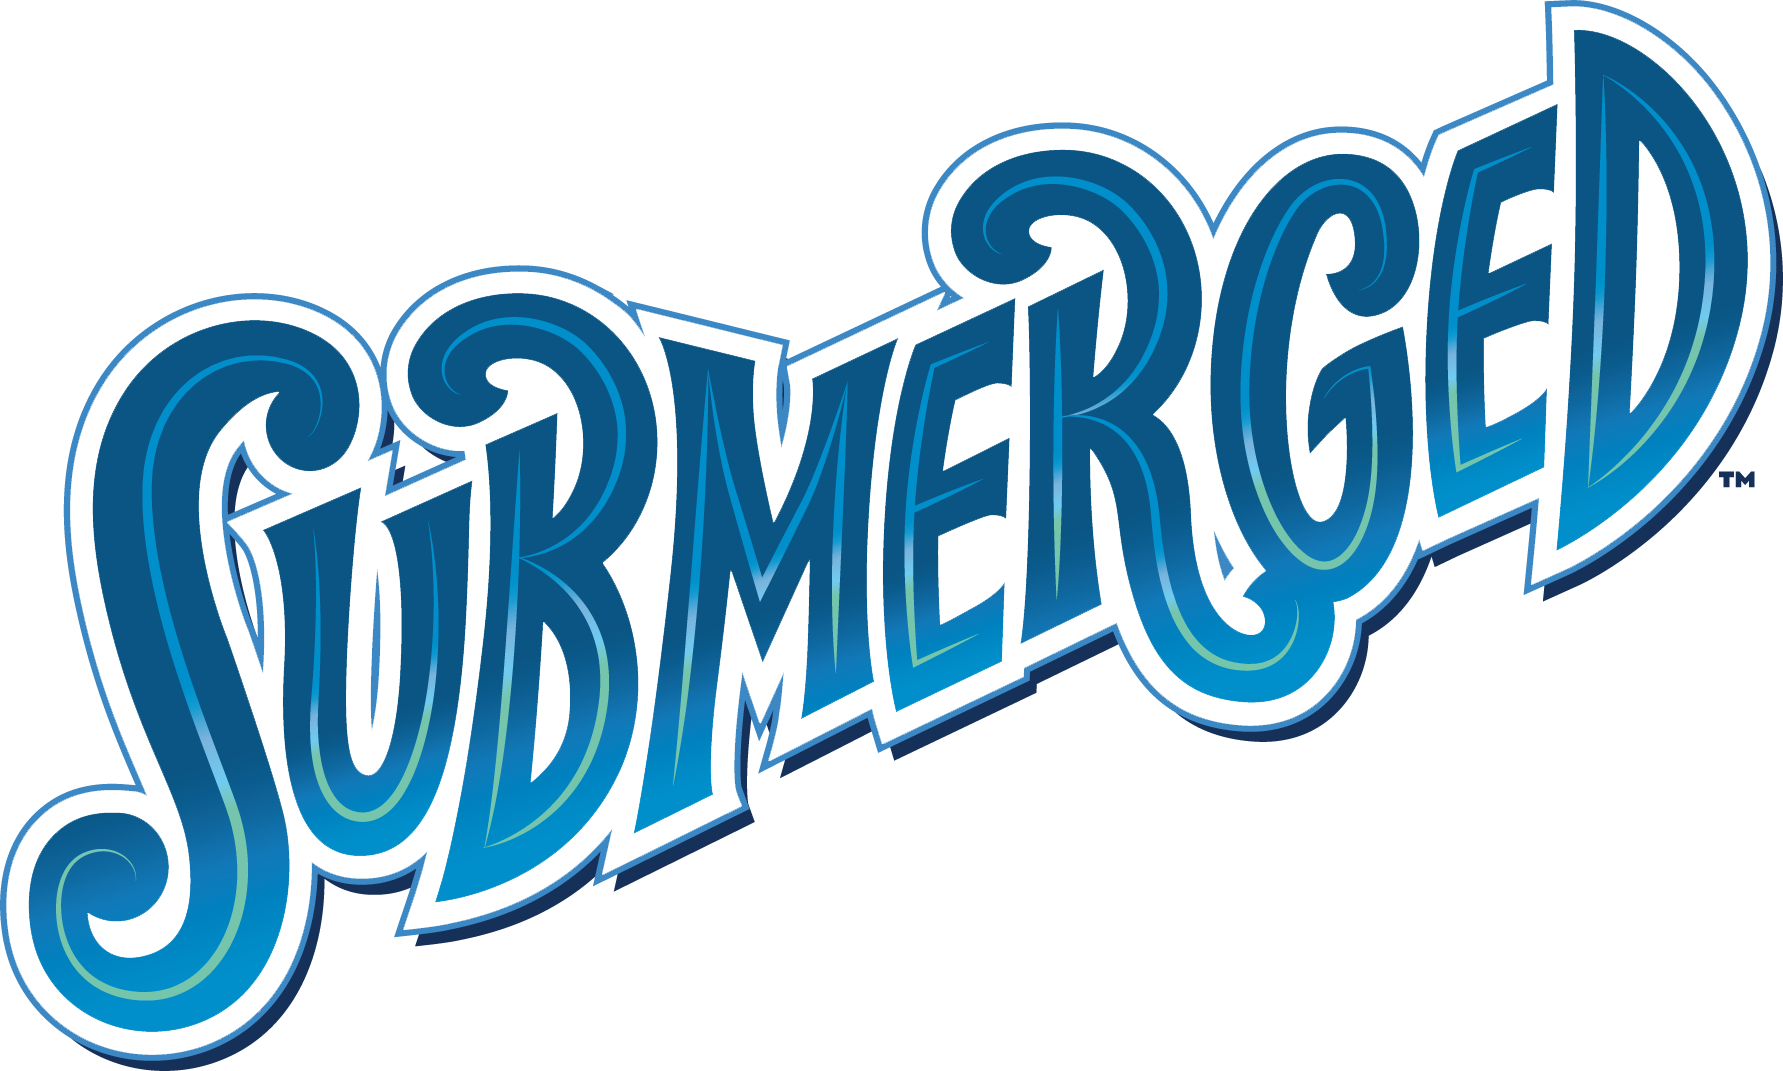 Submerged Only 4c - Submerged Vbs 2016 (1783x1071)